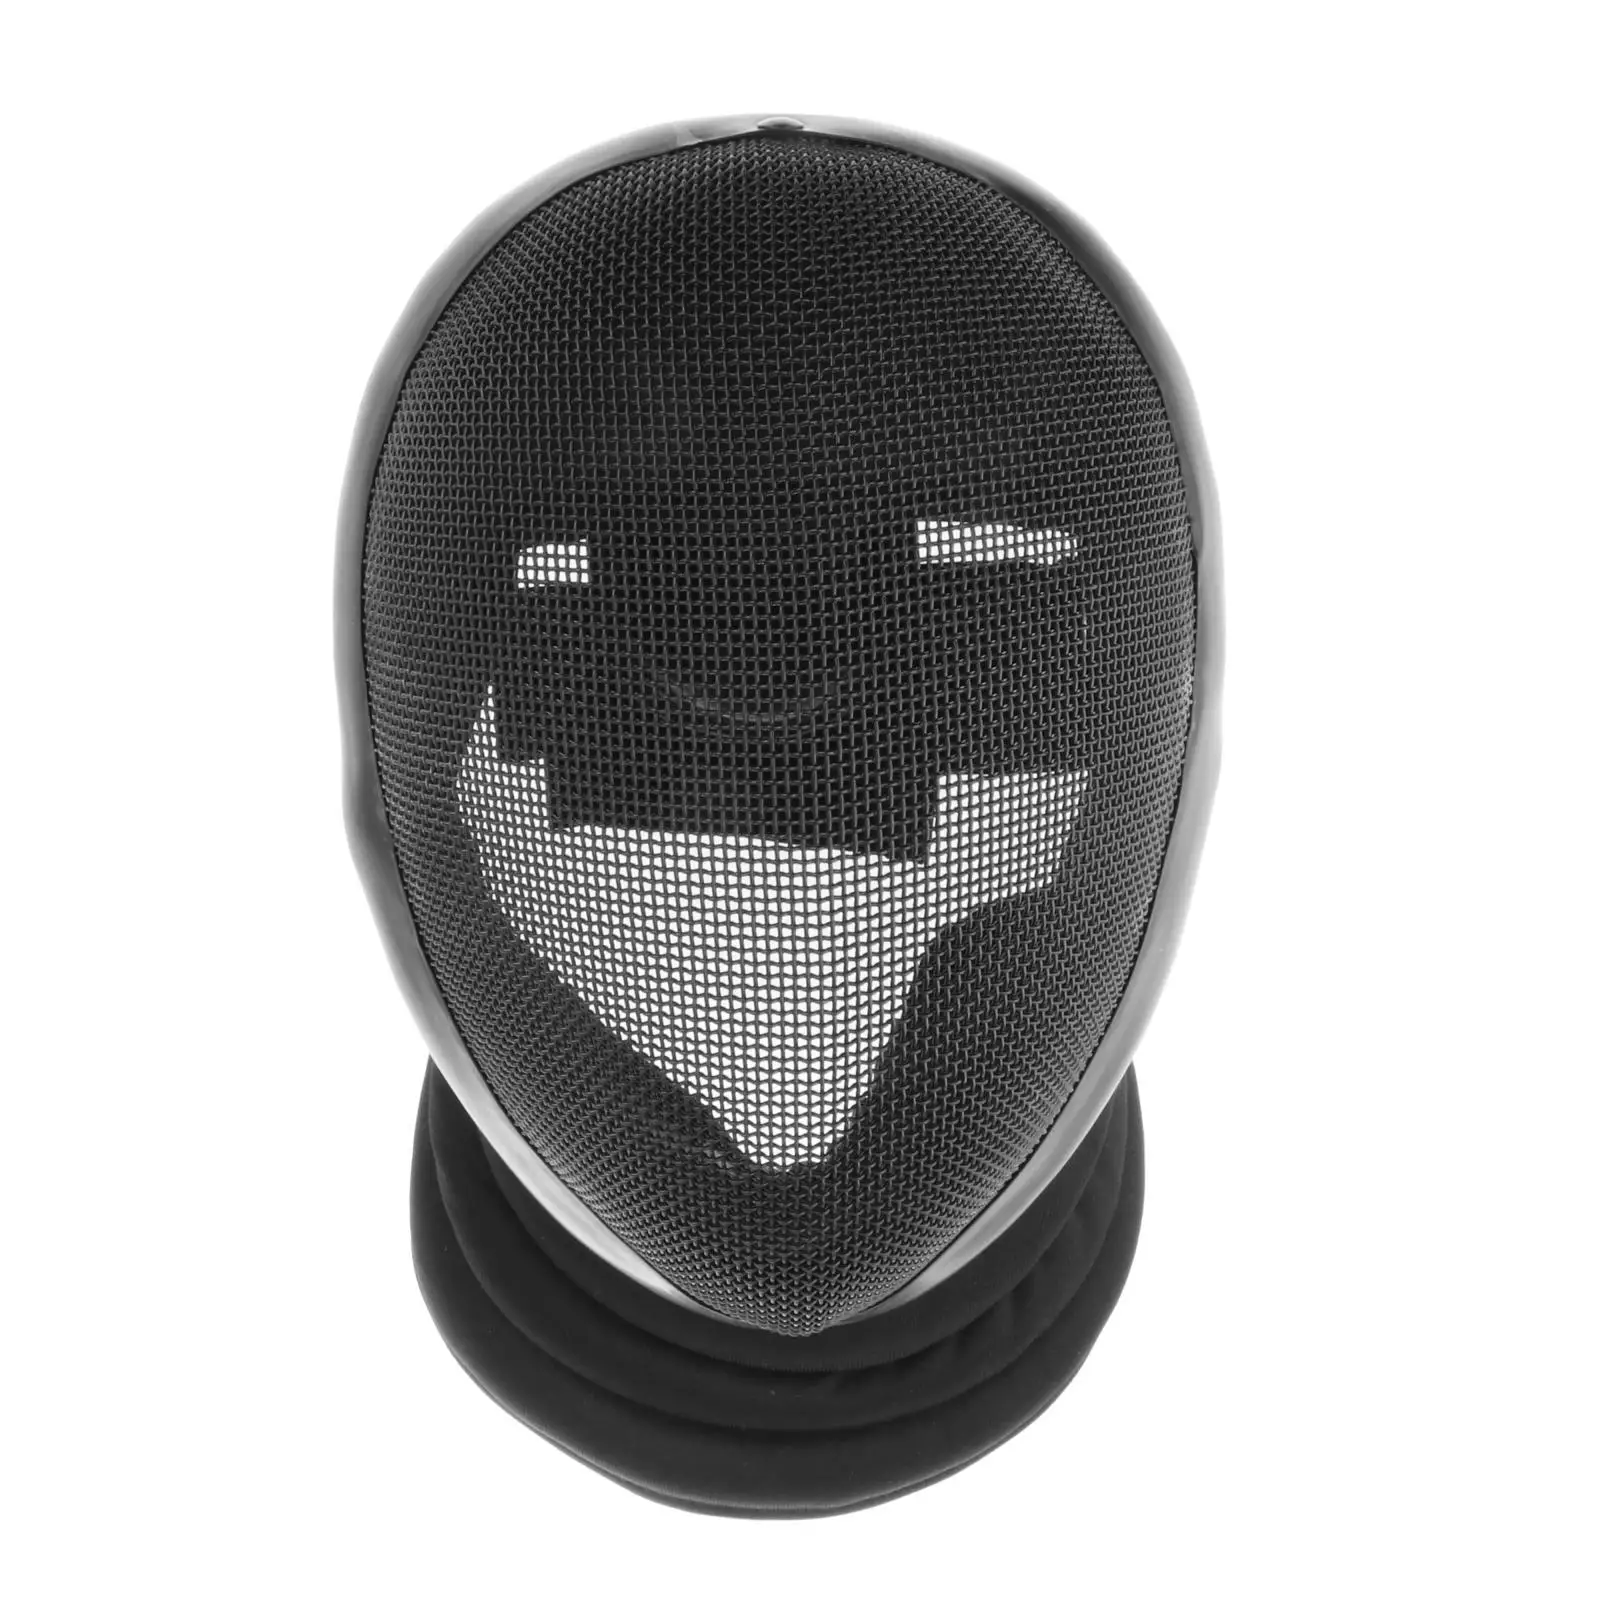 Face Protect with Inner Lining Protection Comfort Kendo Epee Gears Fencing Helmet for Sports Competition Masque Device Practice